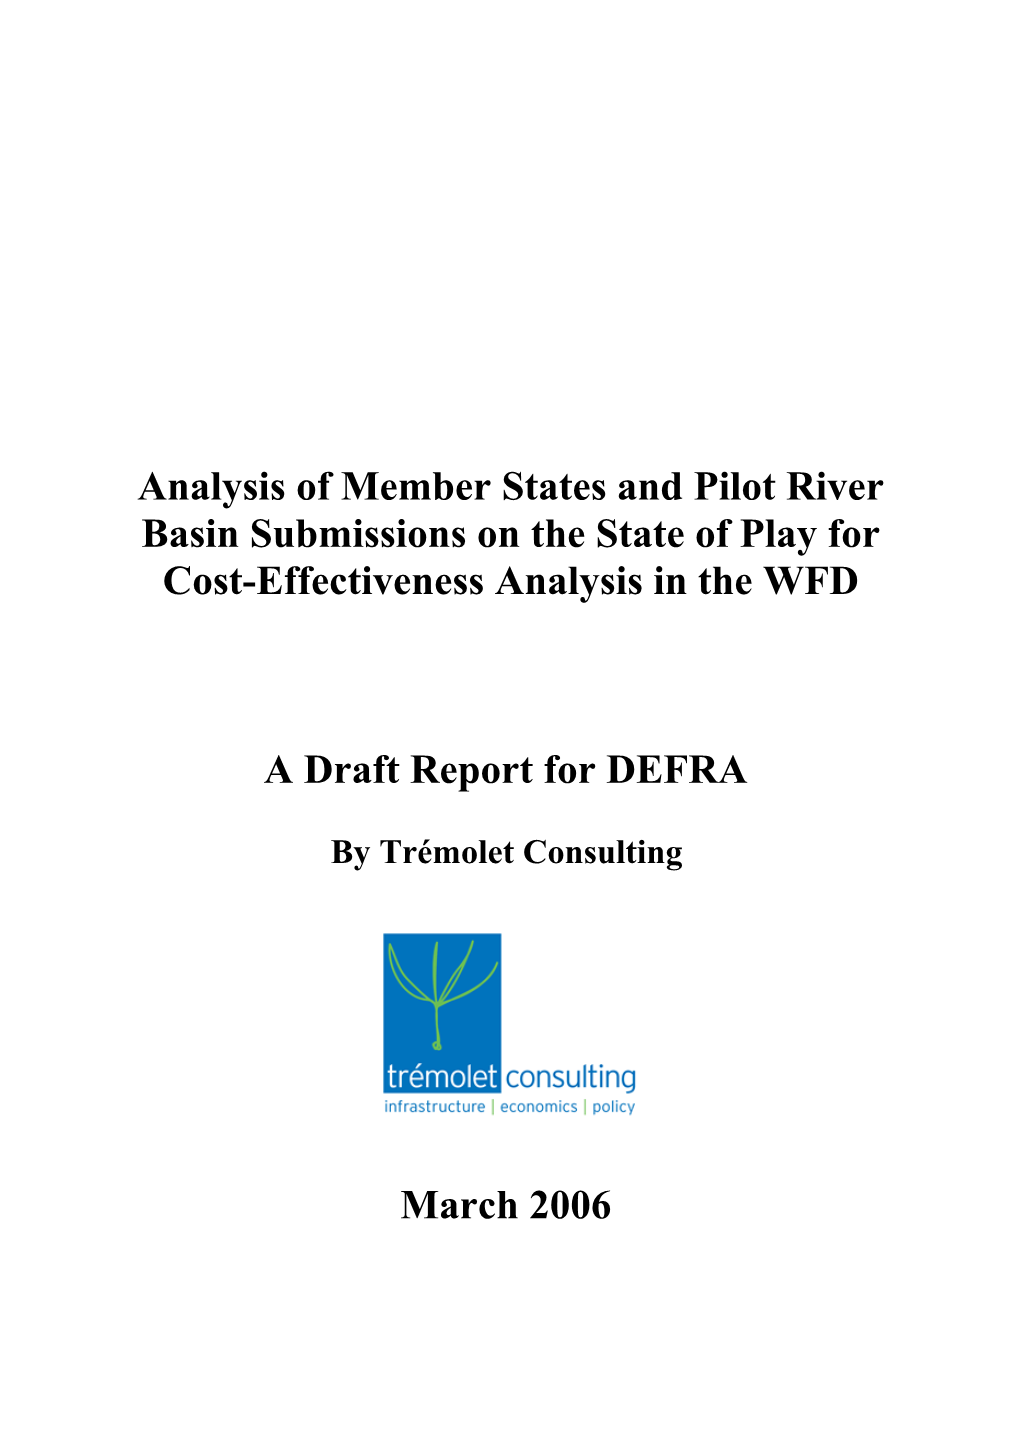 A Draft Report for DEFRA